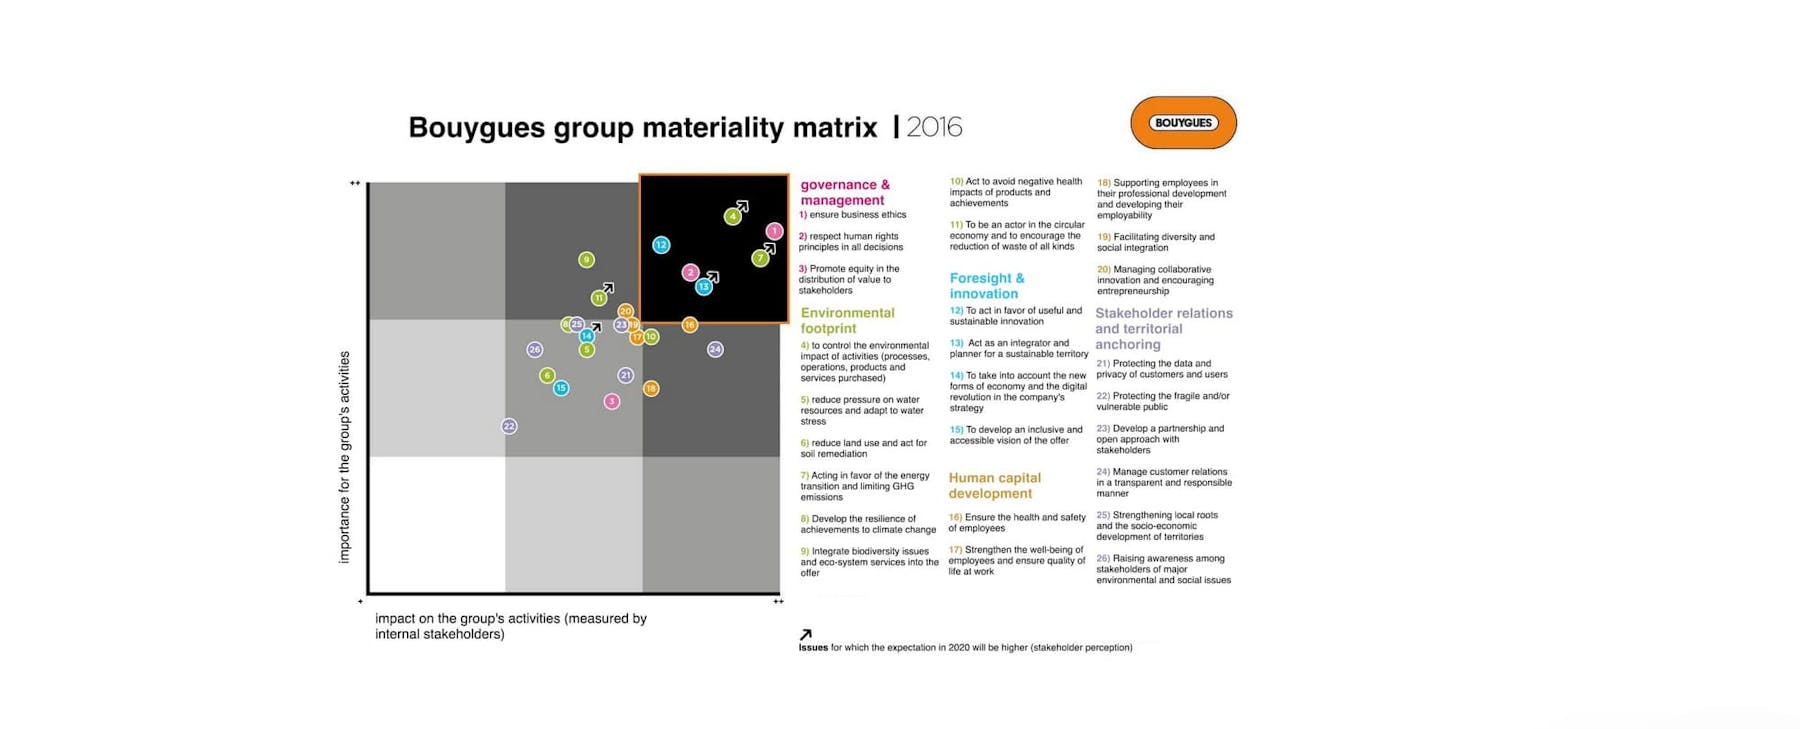 Bouygues group materiality matrix